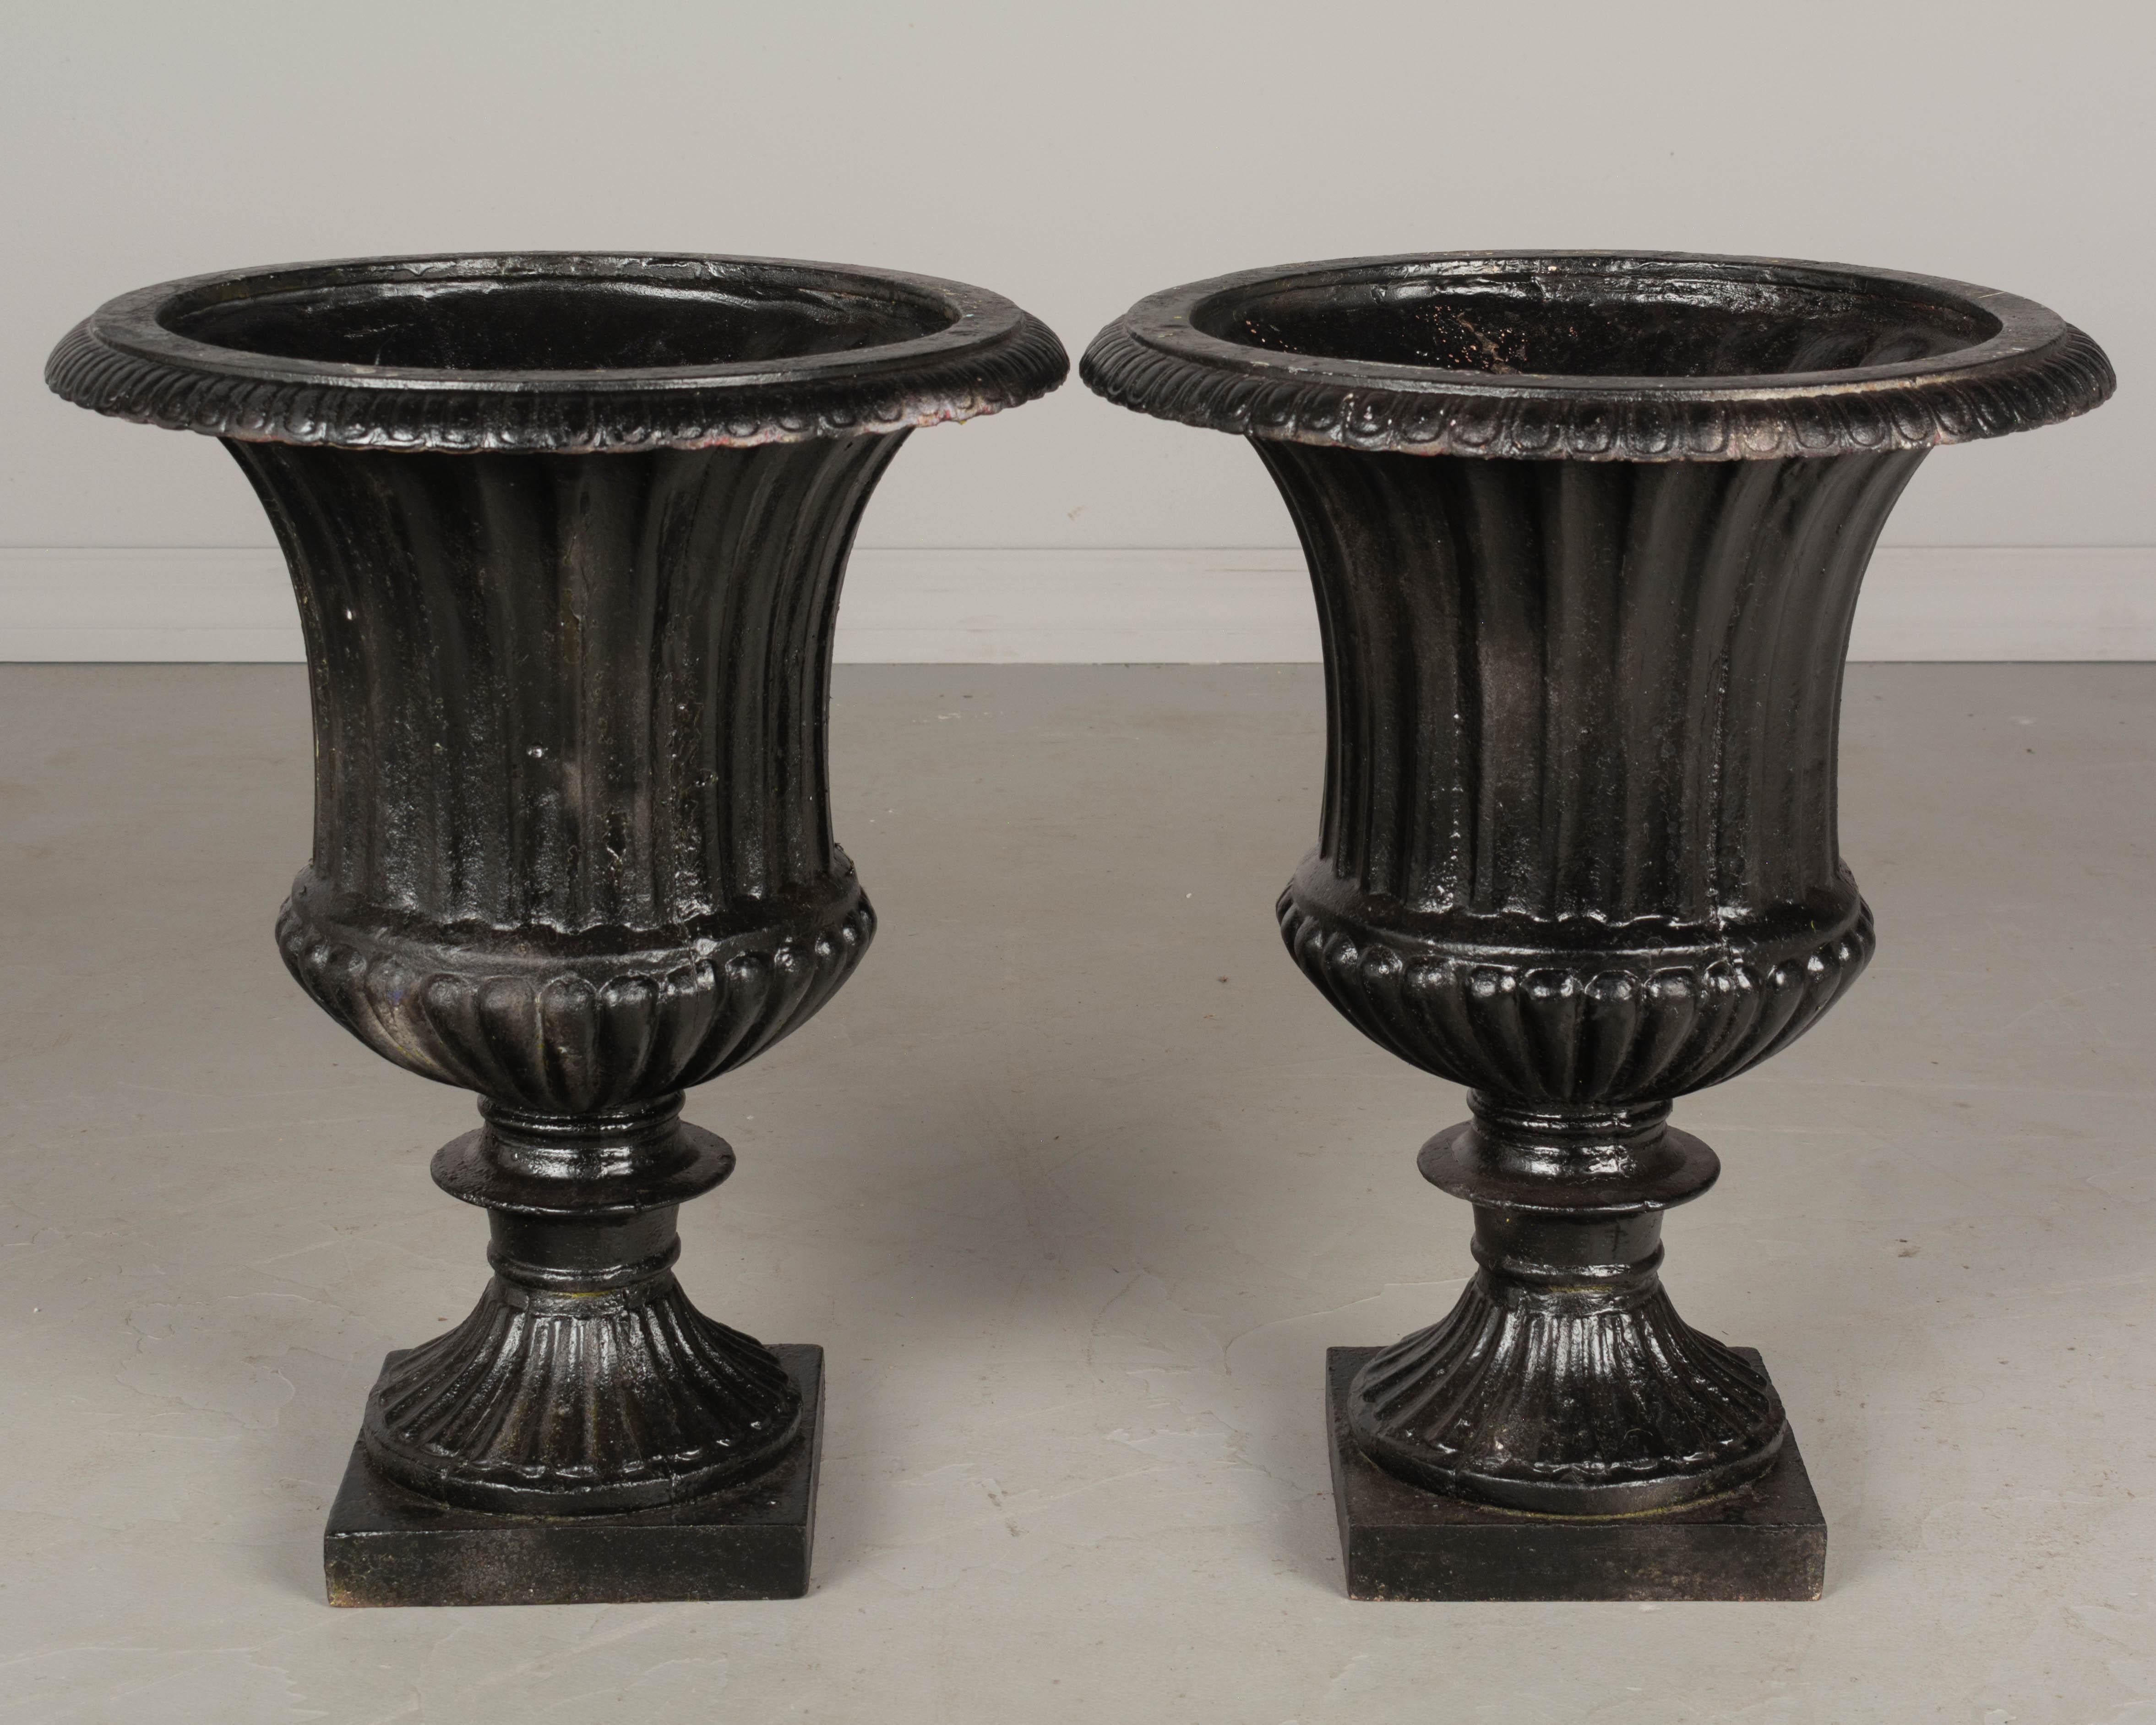 Beaux Arts Pair of 19th Century French Cast Iron Urns For Sale